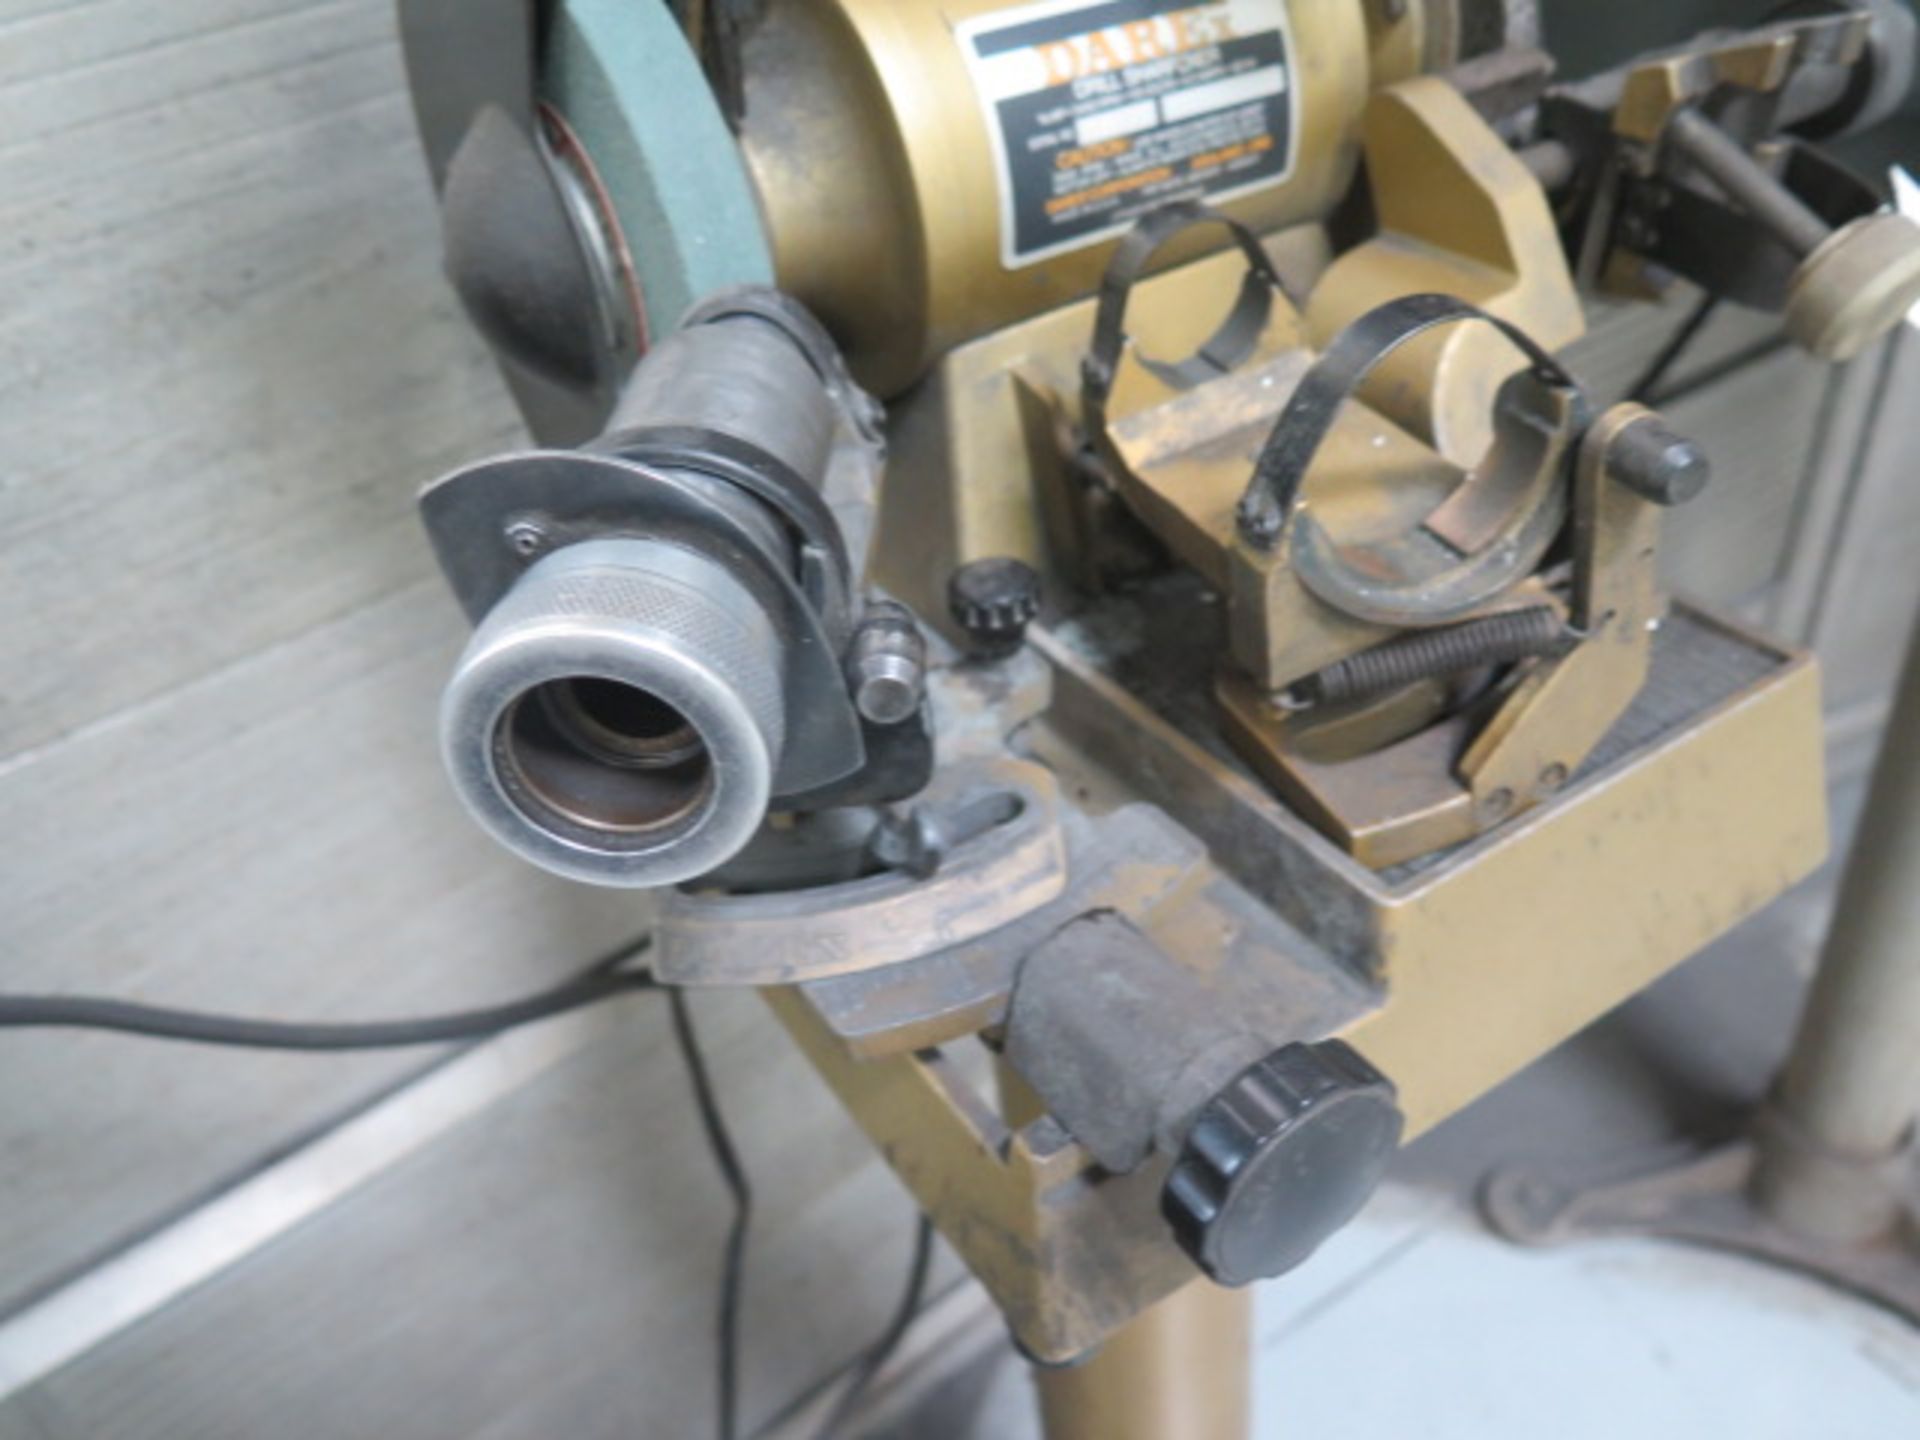 Darex Pedestal Drill Sharpener. This Item is Sold AS IS and with NO Warranty Applied. - Image 3 of 7